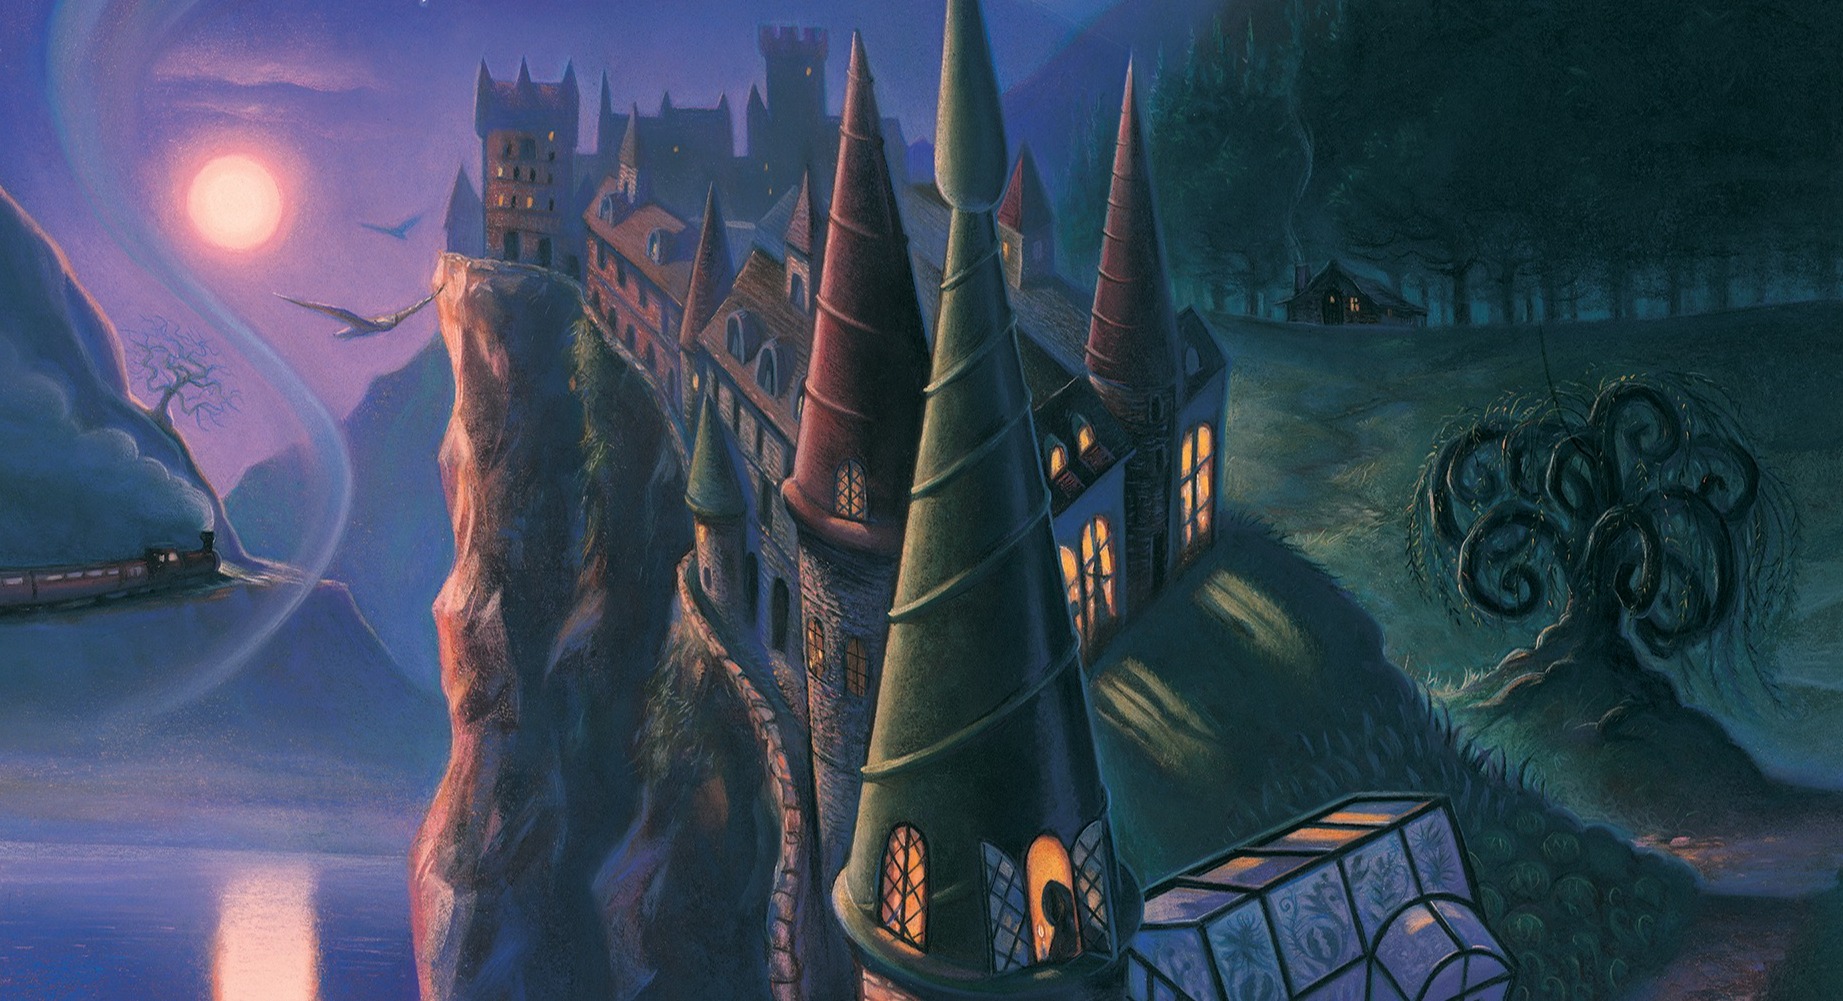 10 cool Hogwarts facts to impress your friends